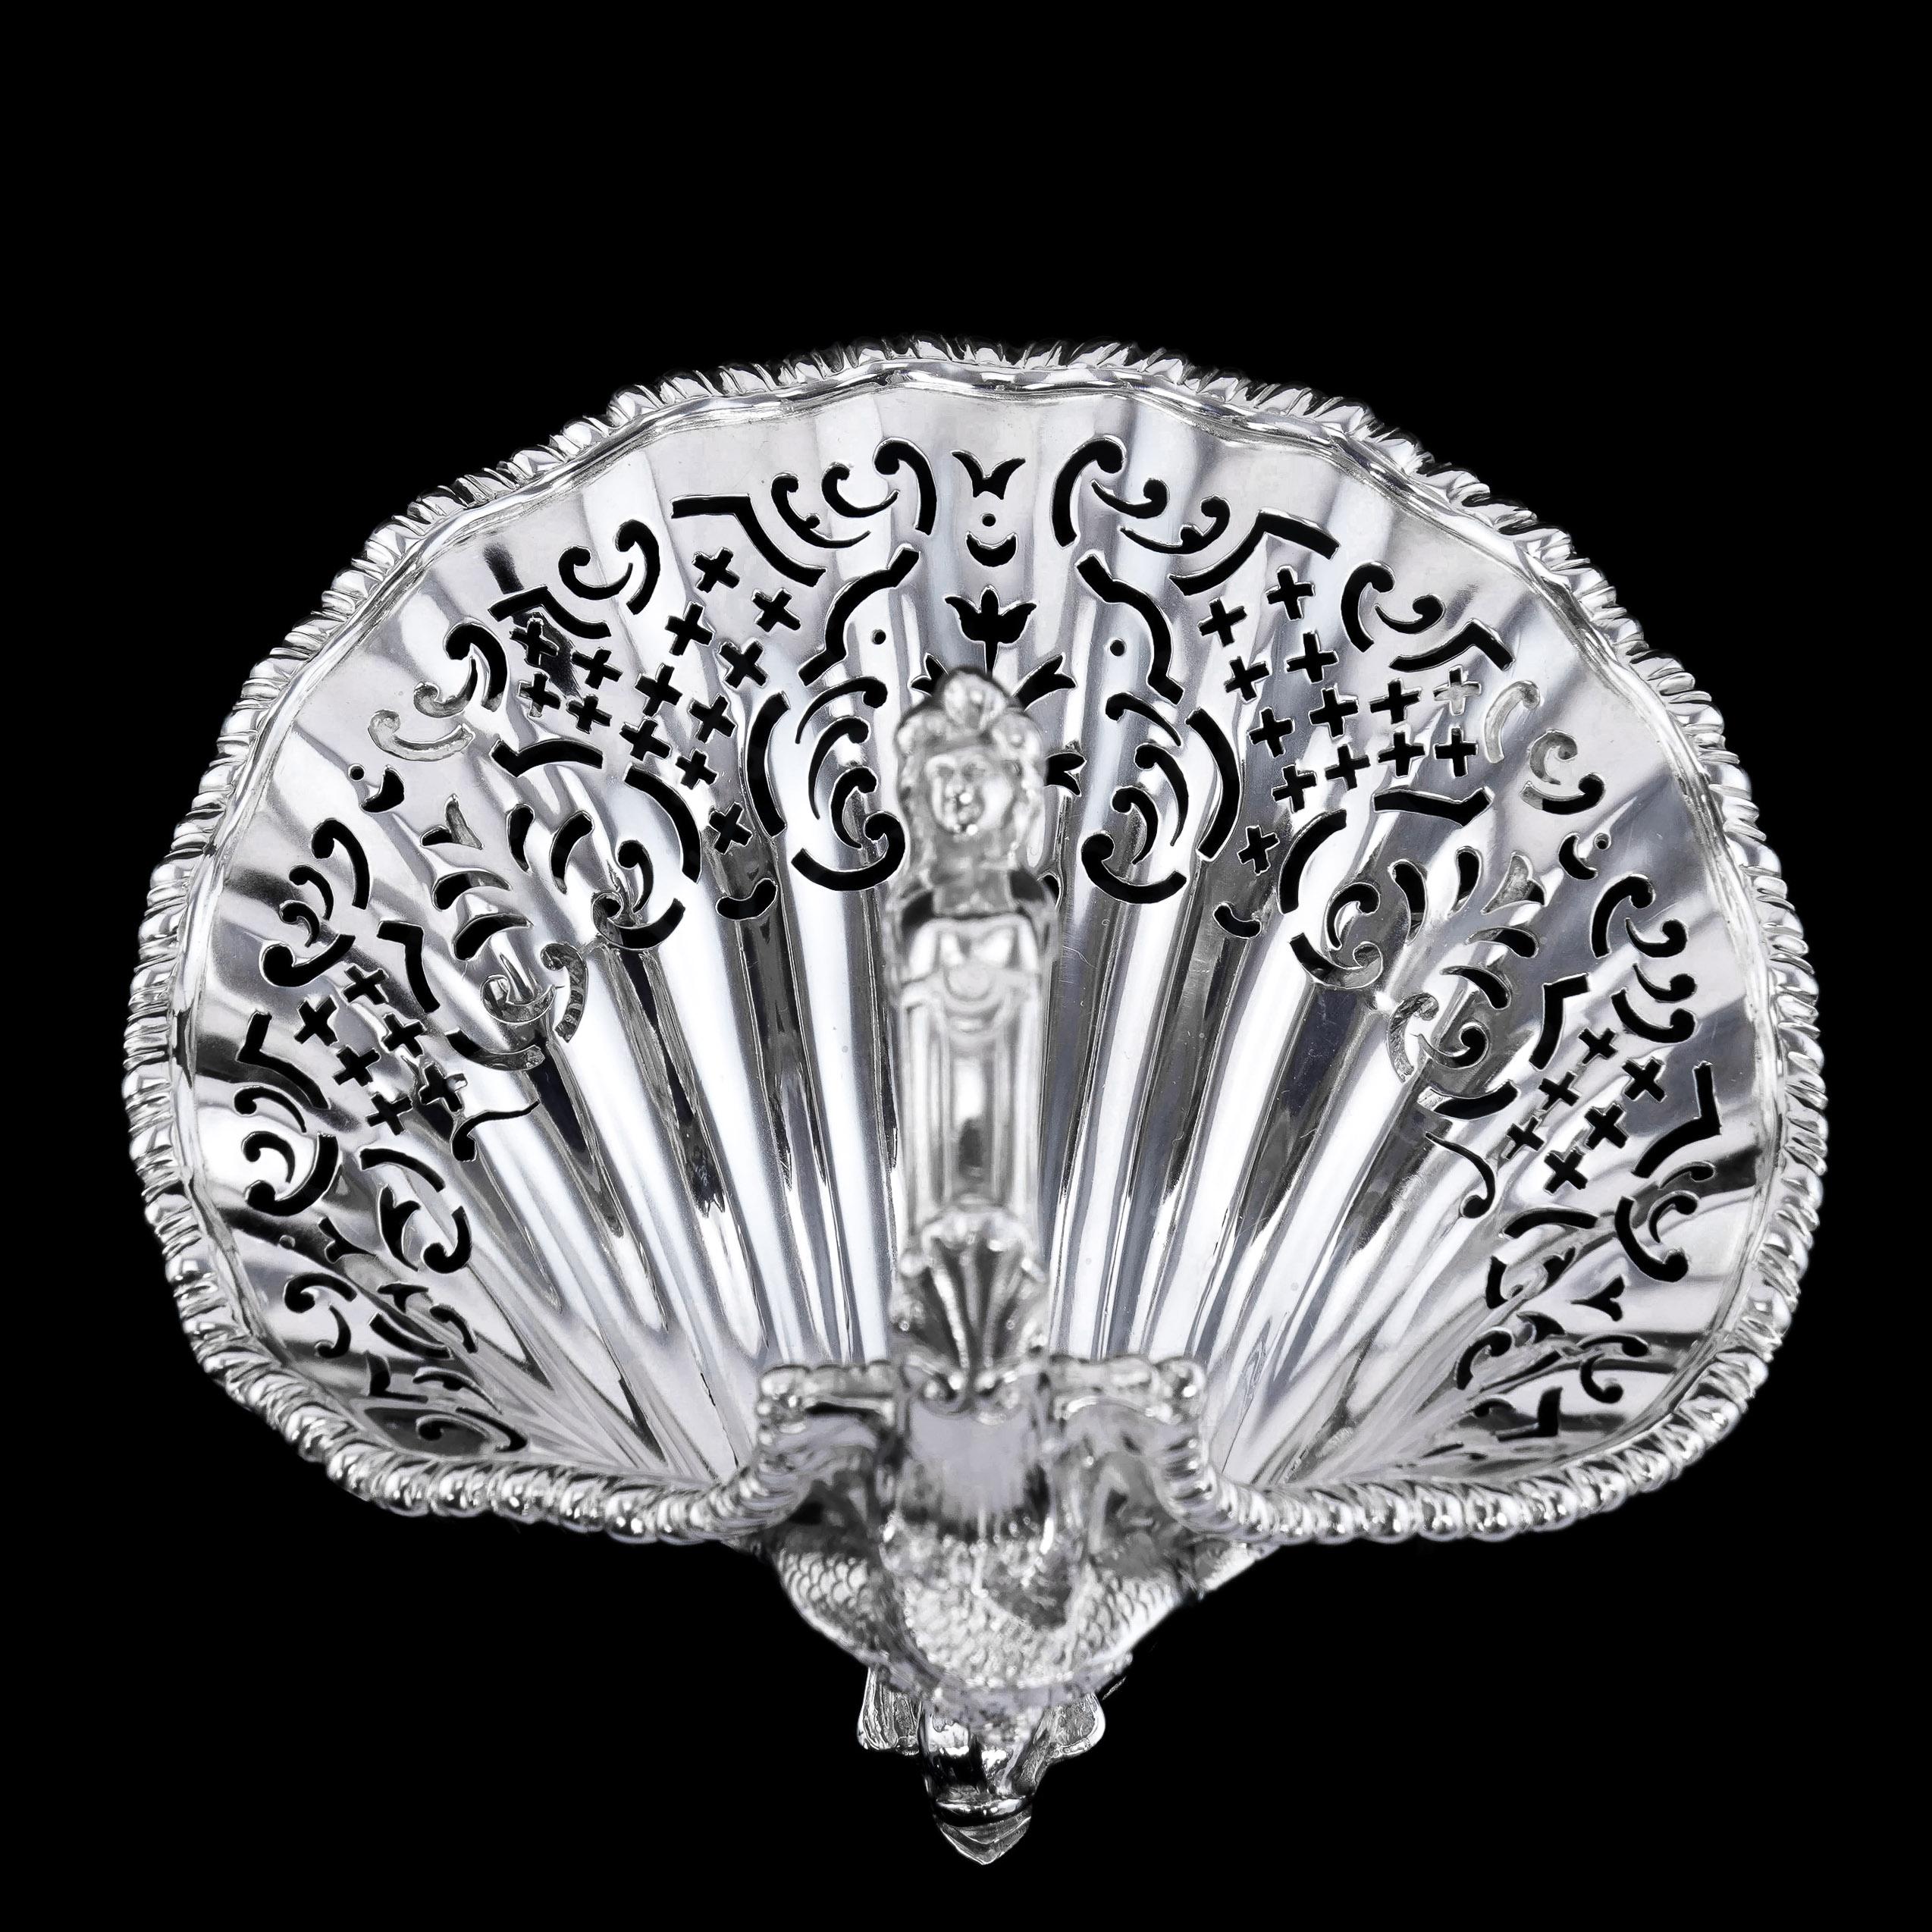 Antique SterlingSilver Rococo Shell Dish in the Manner of Paul de Lamerie - 1908 For Sale 7